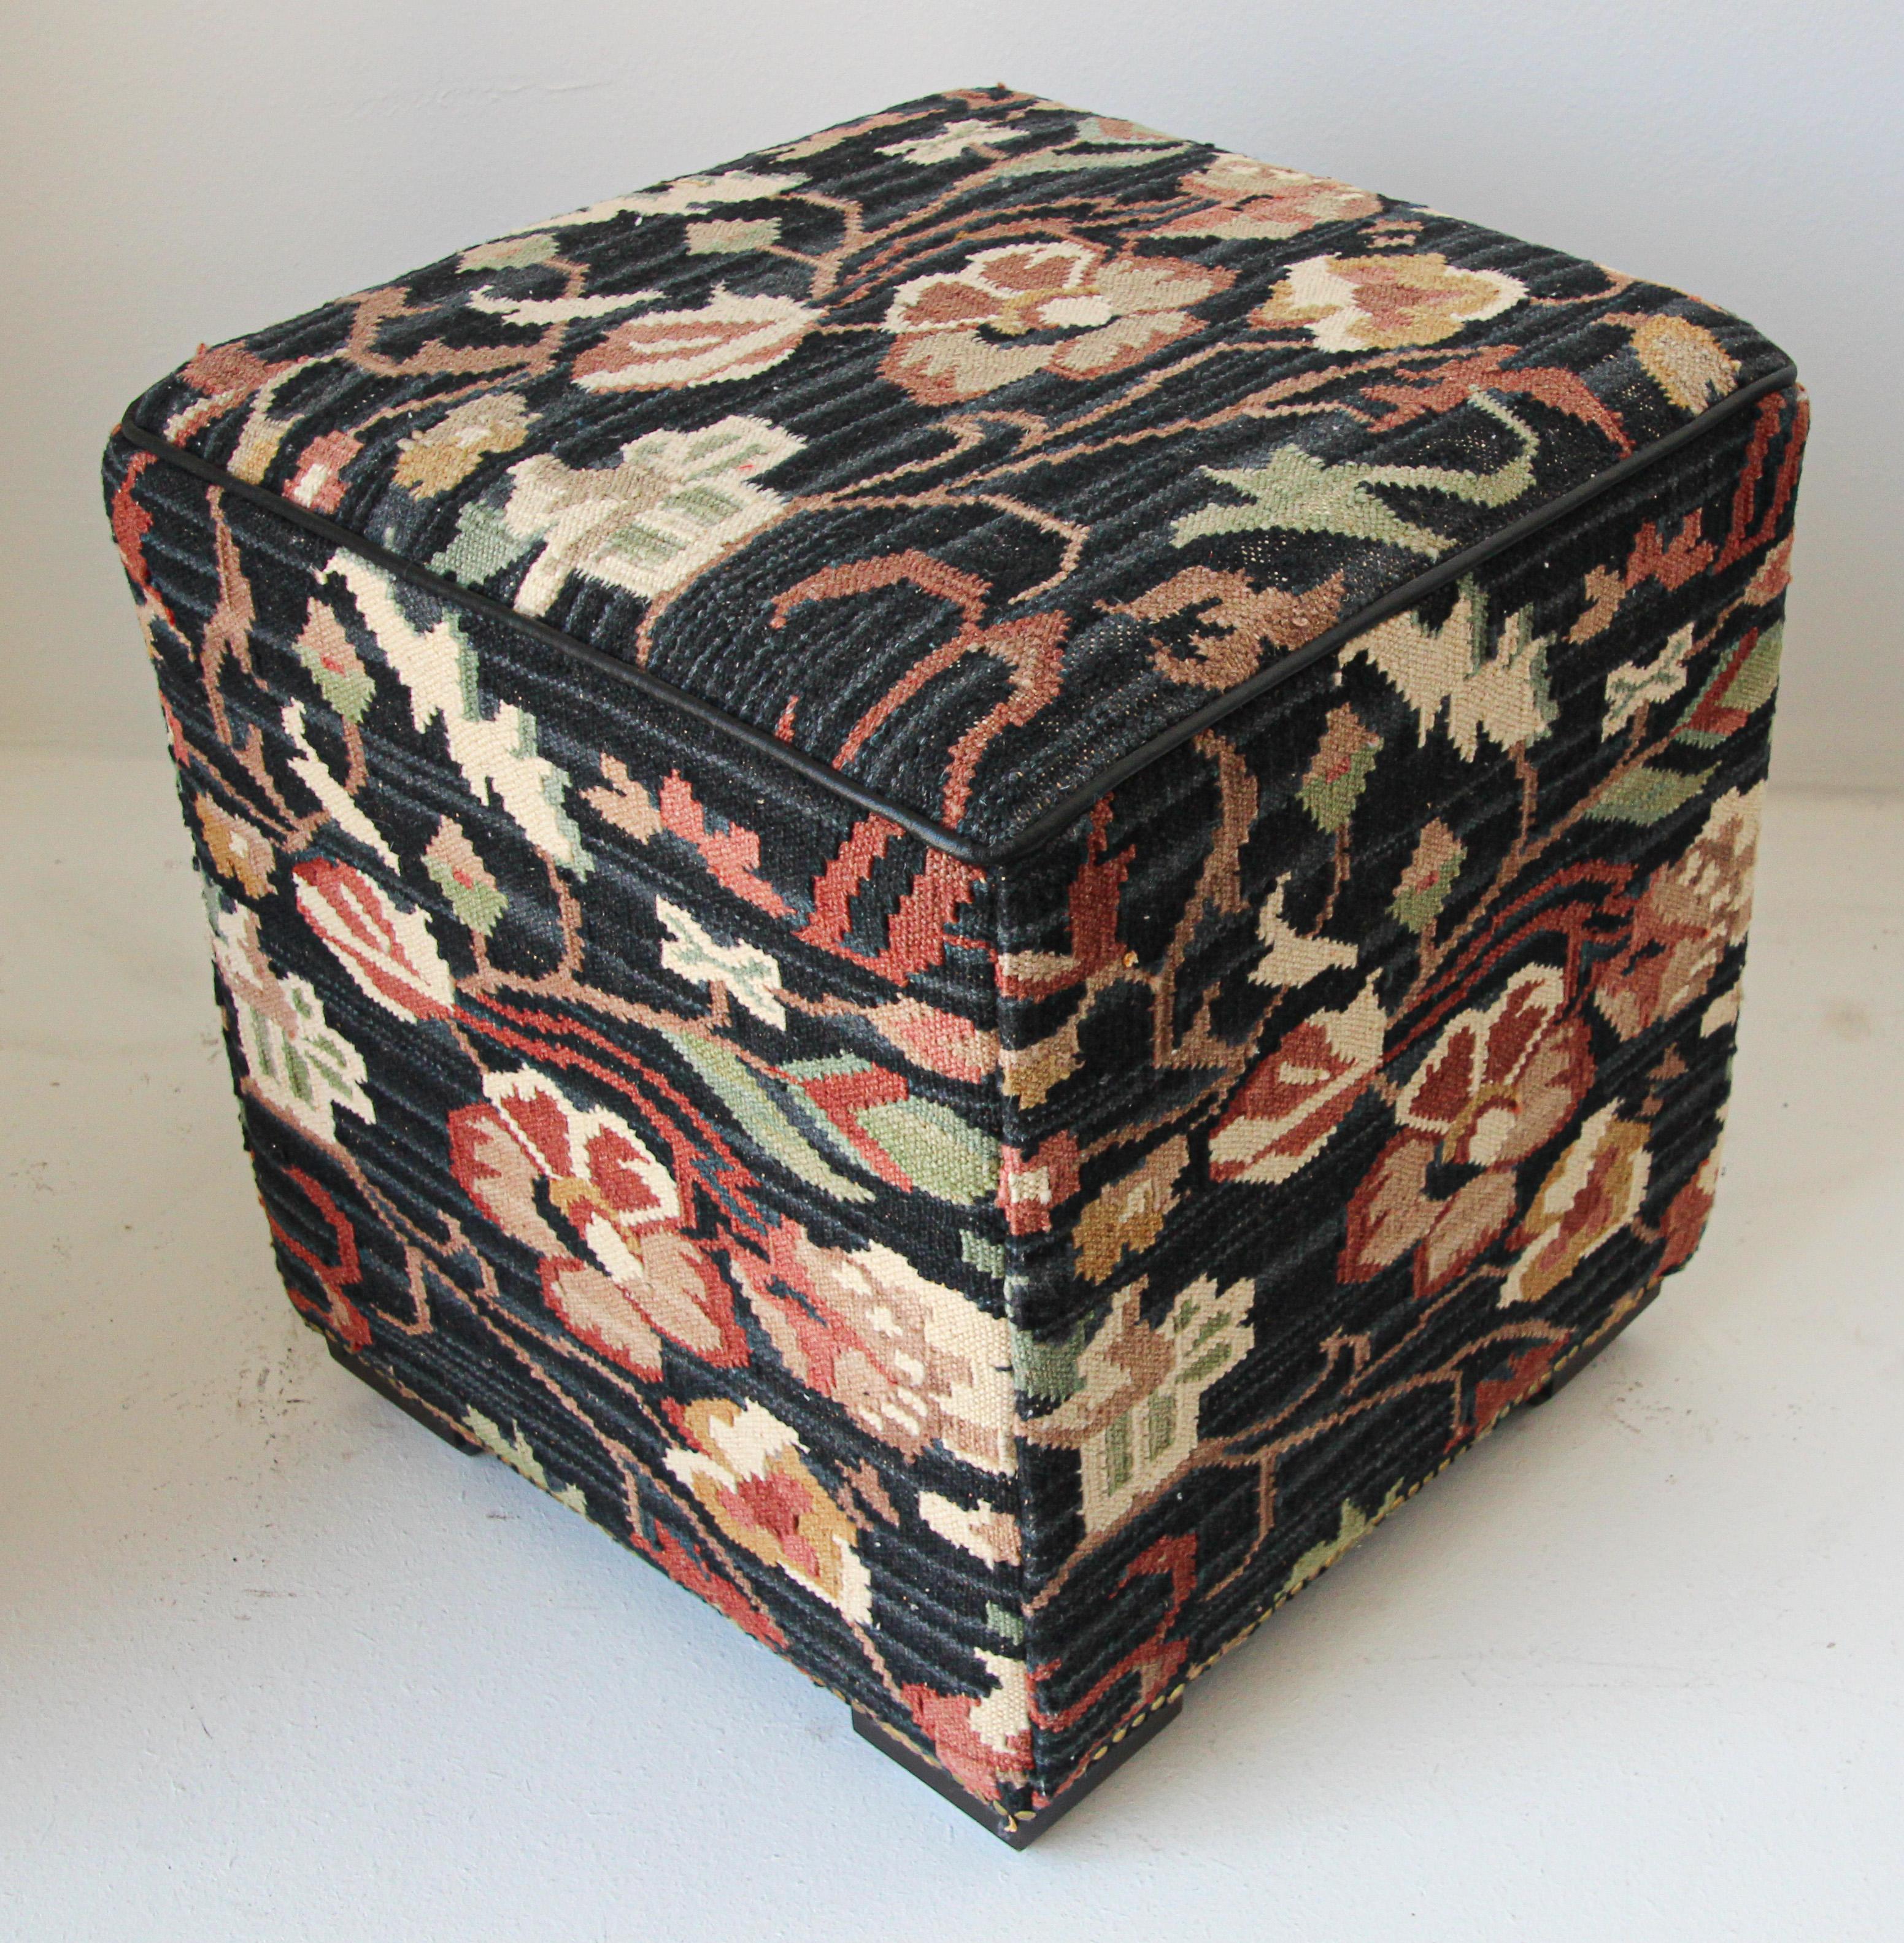 Handcrafted Turkish kilim ottoman, square hassock, upholstered with kilim rug fabric textured in black with floral design.
Moroccan style little tufted square pouf hassock, upholstered footstool.
This versatile accent piece, pouf is designed